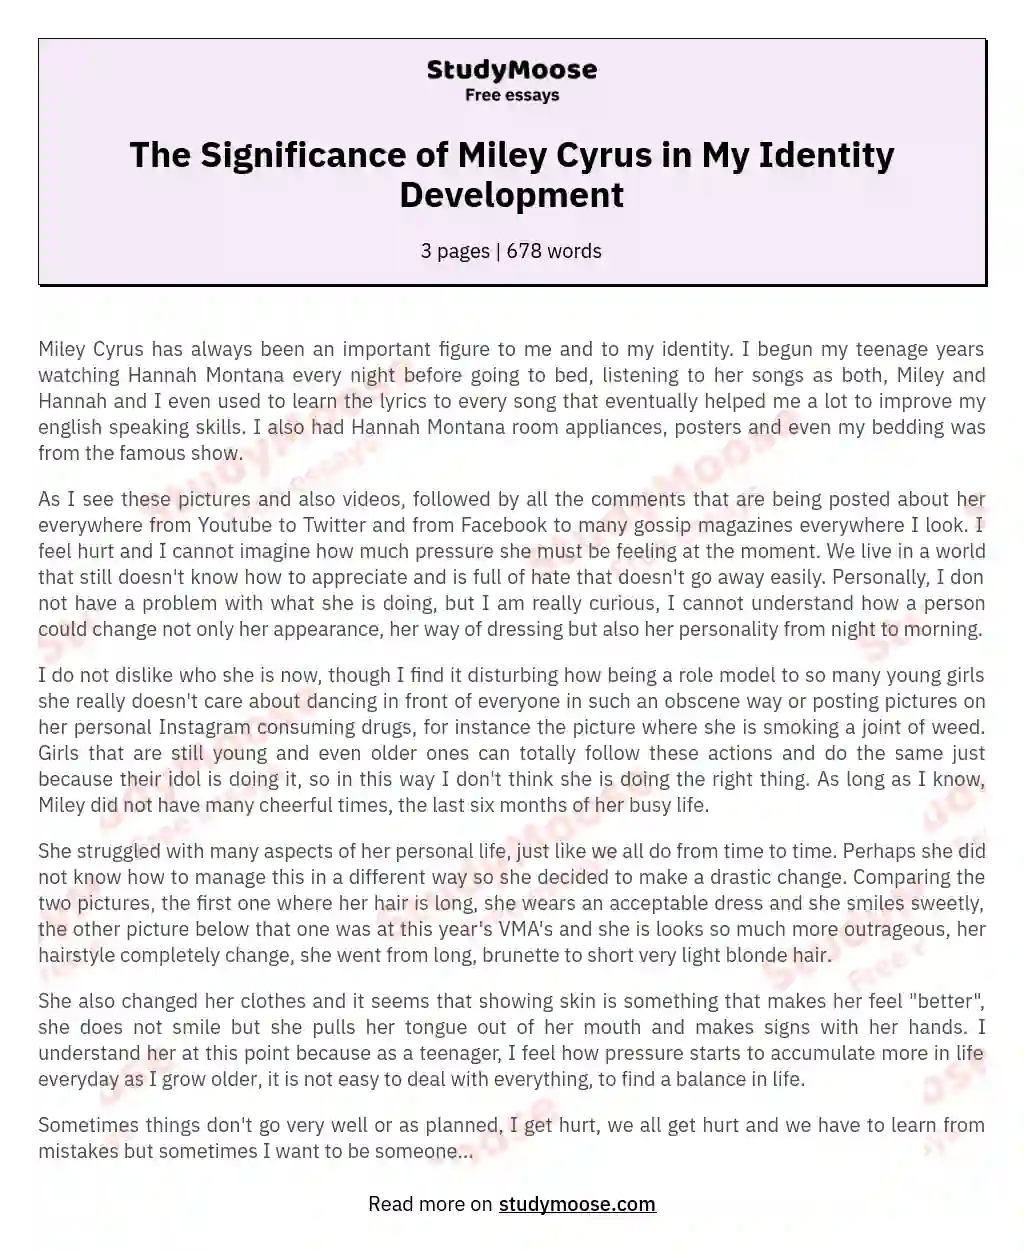 The Significance of Miley Cyrus in My Identity Development essay